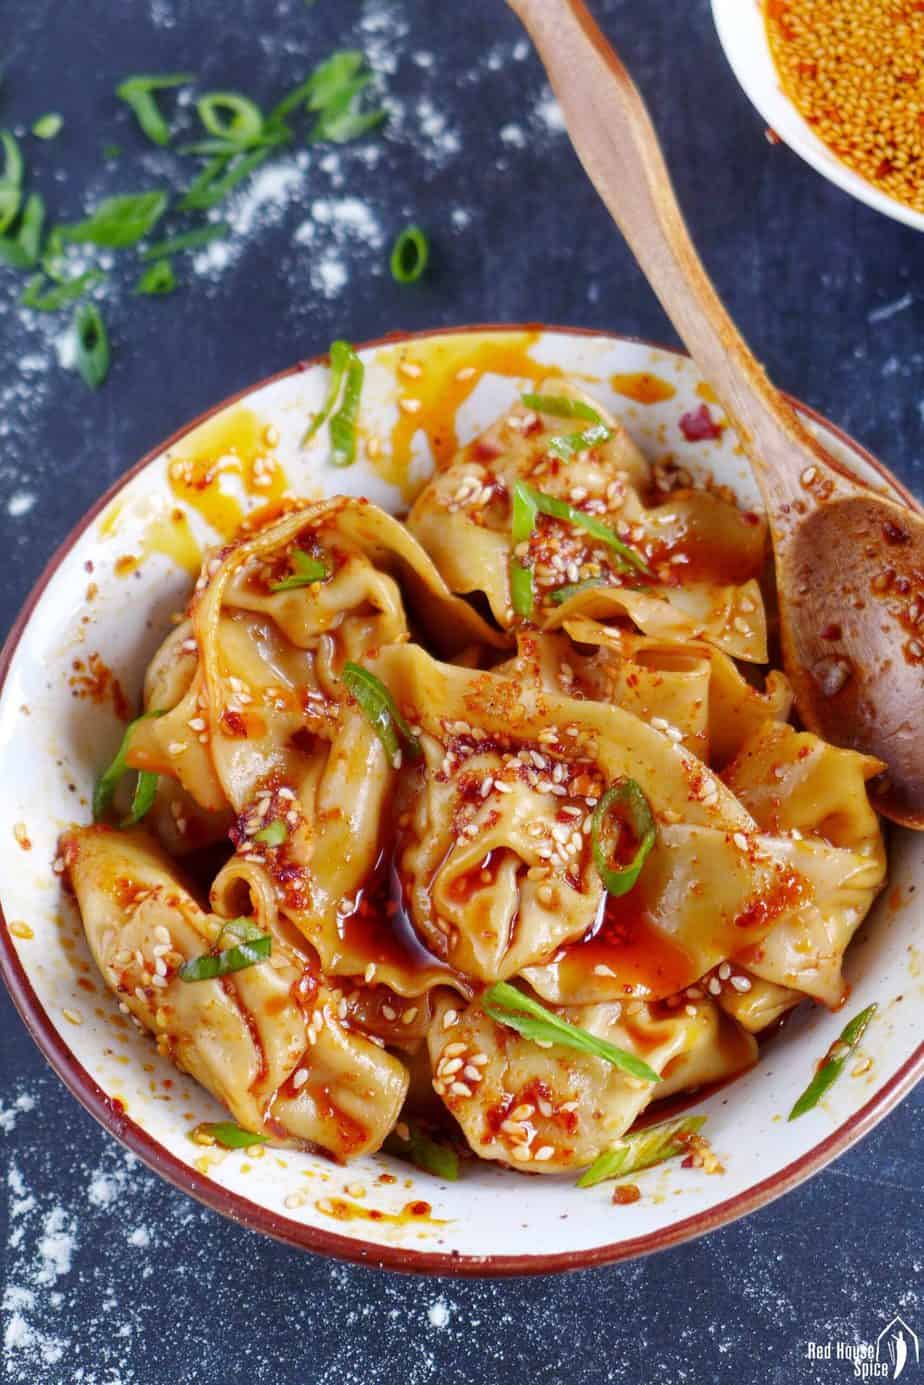 Spicy wontons seasoned with chili oil